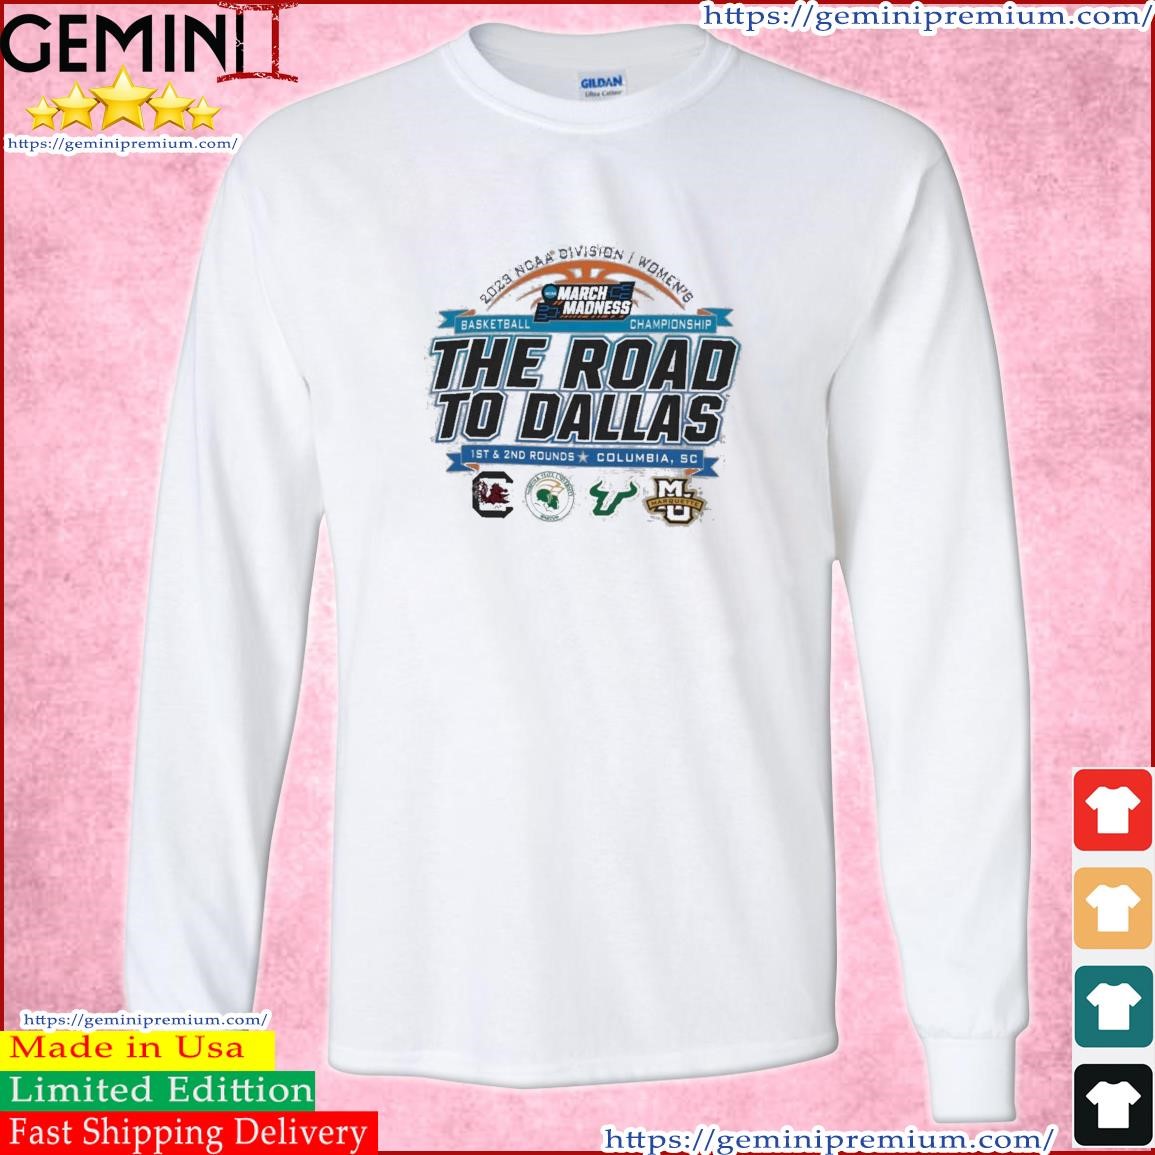 2023 NCAA Division I Women's Basketball The Road To Dallas March Madness 1st & 2nd Rounds Columbia, SC Shirt Long Sleeve Tee.jpg